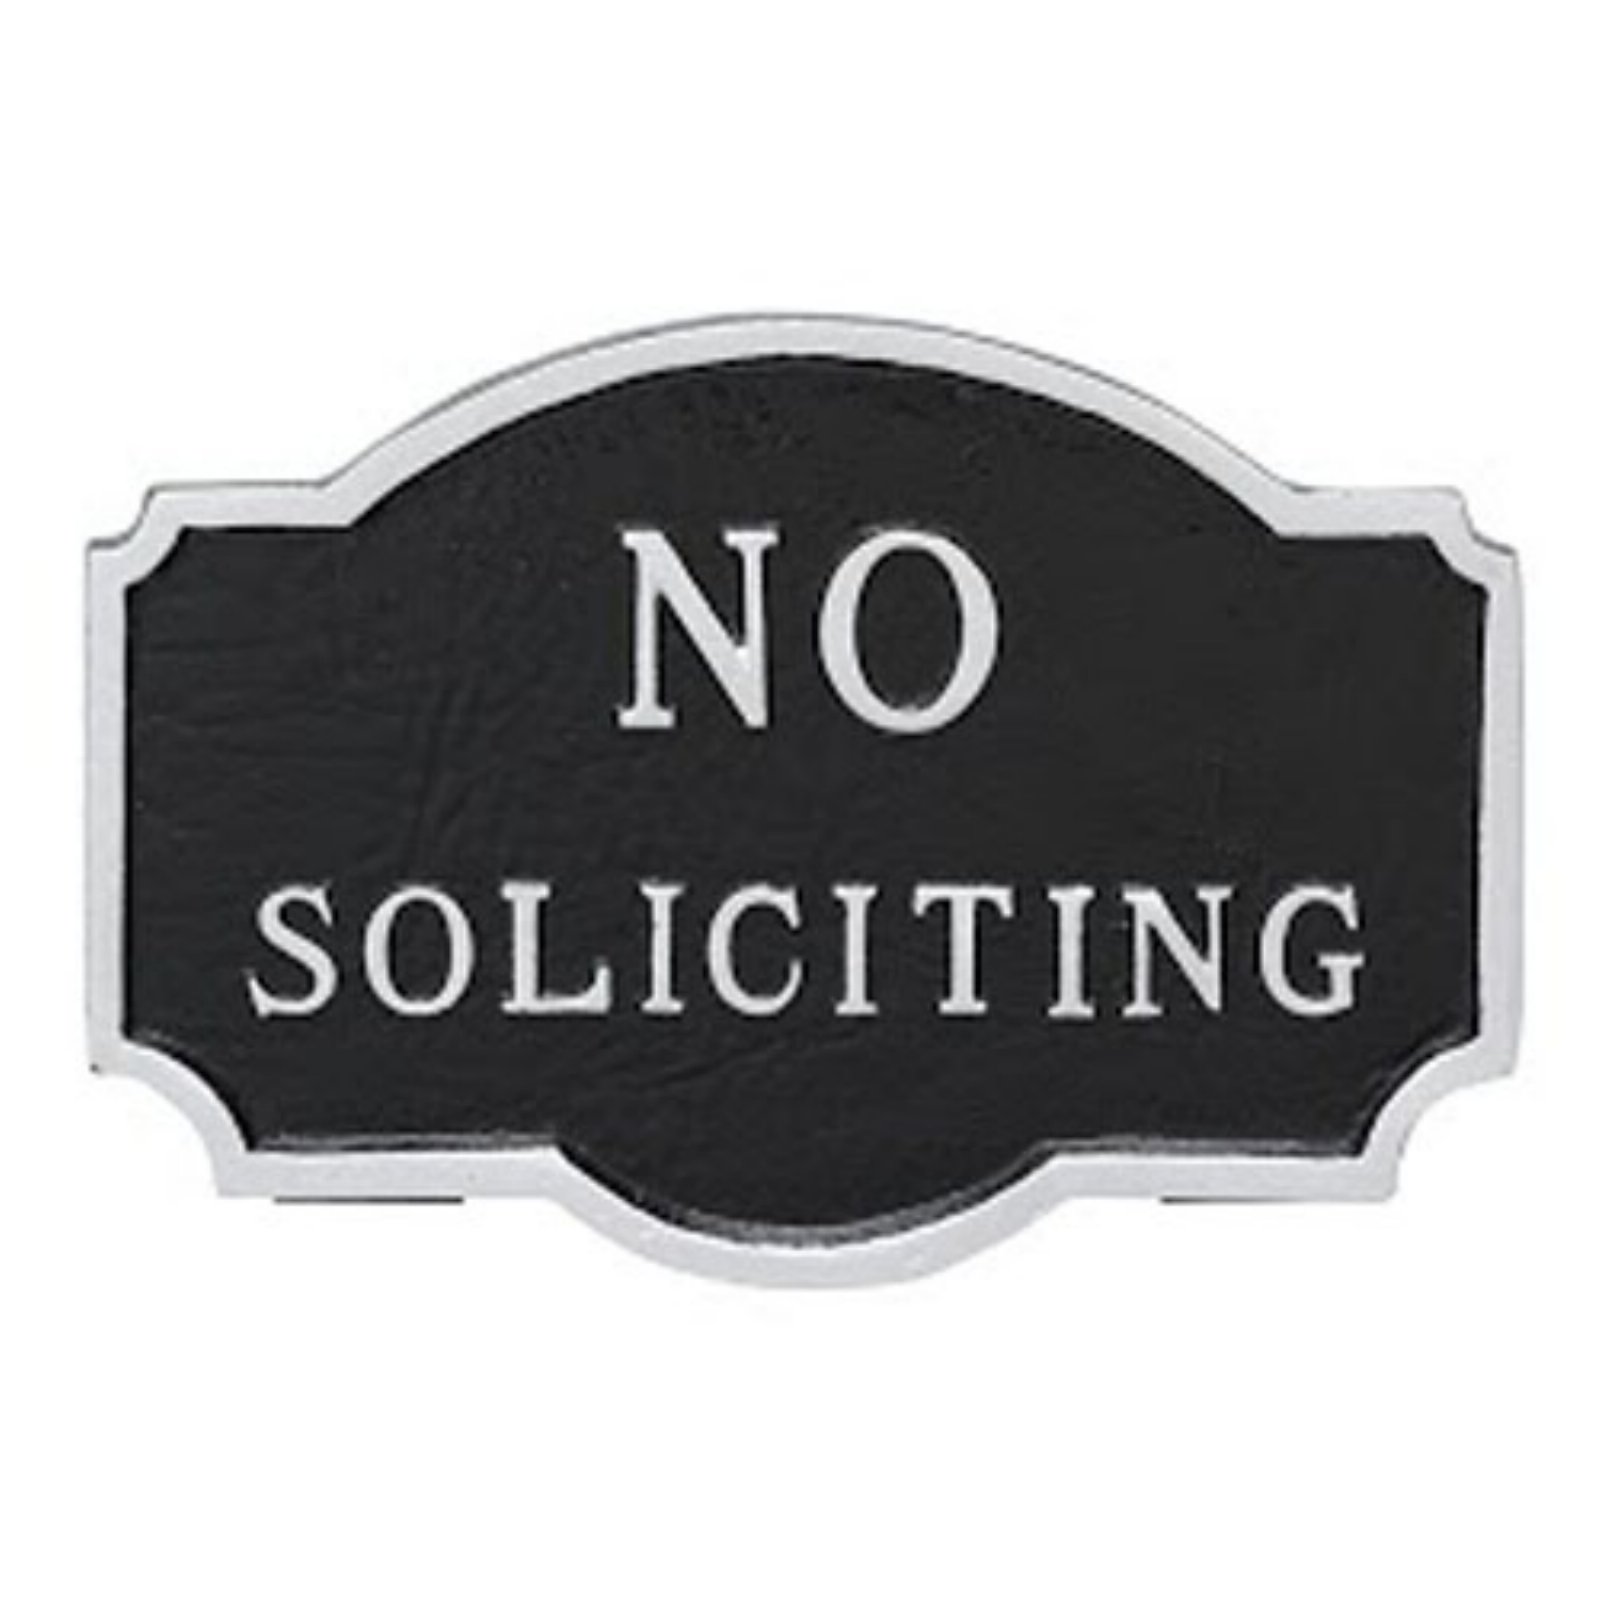 montague metal products petite montague no soliciting statement plaque, black with silver letter, 4.5" x 7.15" - image 1 of 2